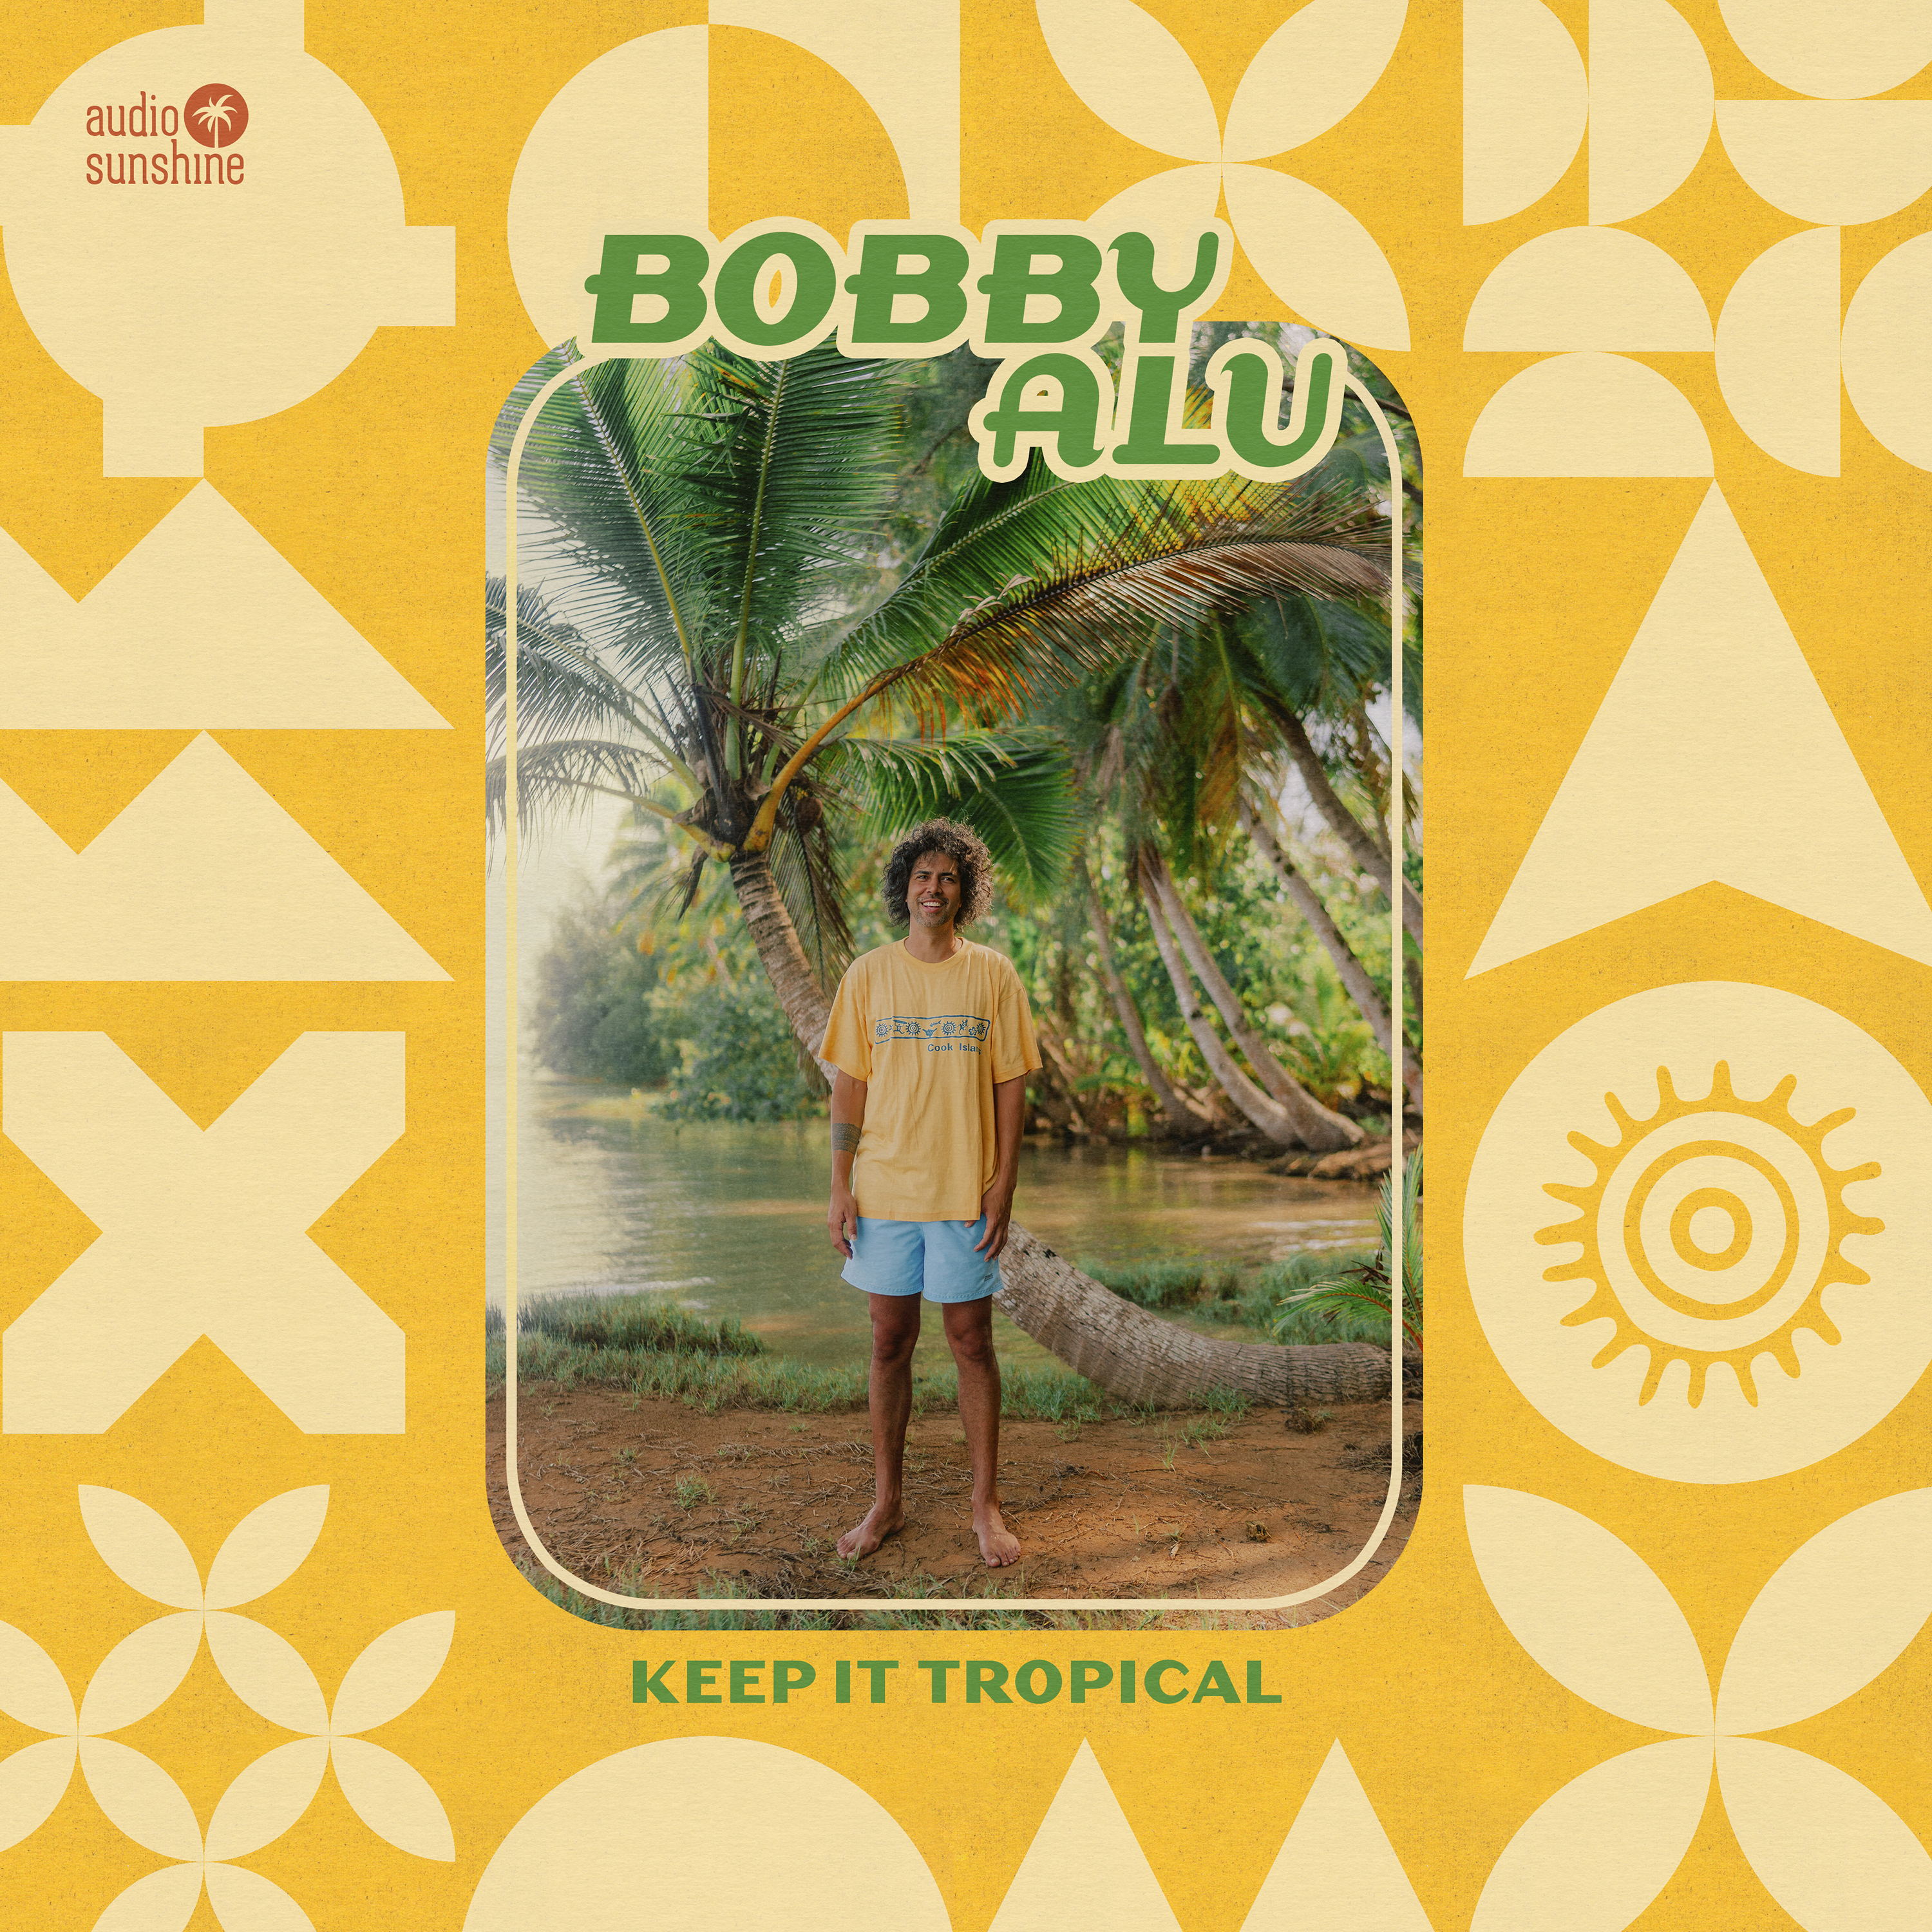 Photograph of Bobby Alu against a pam tree lined body of water, framed by yellow, geometric artwork